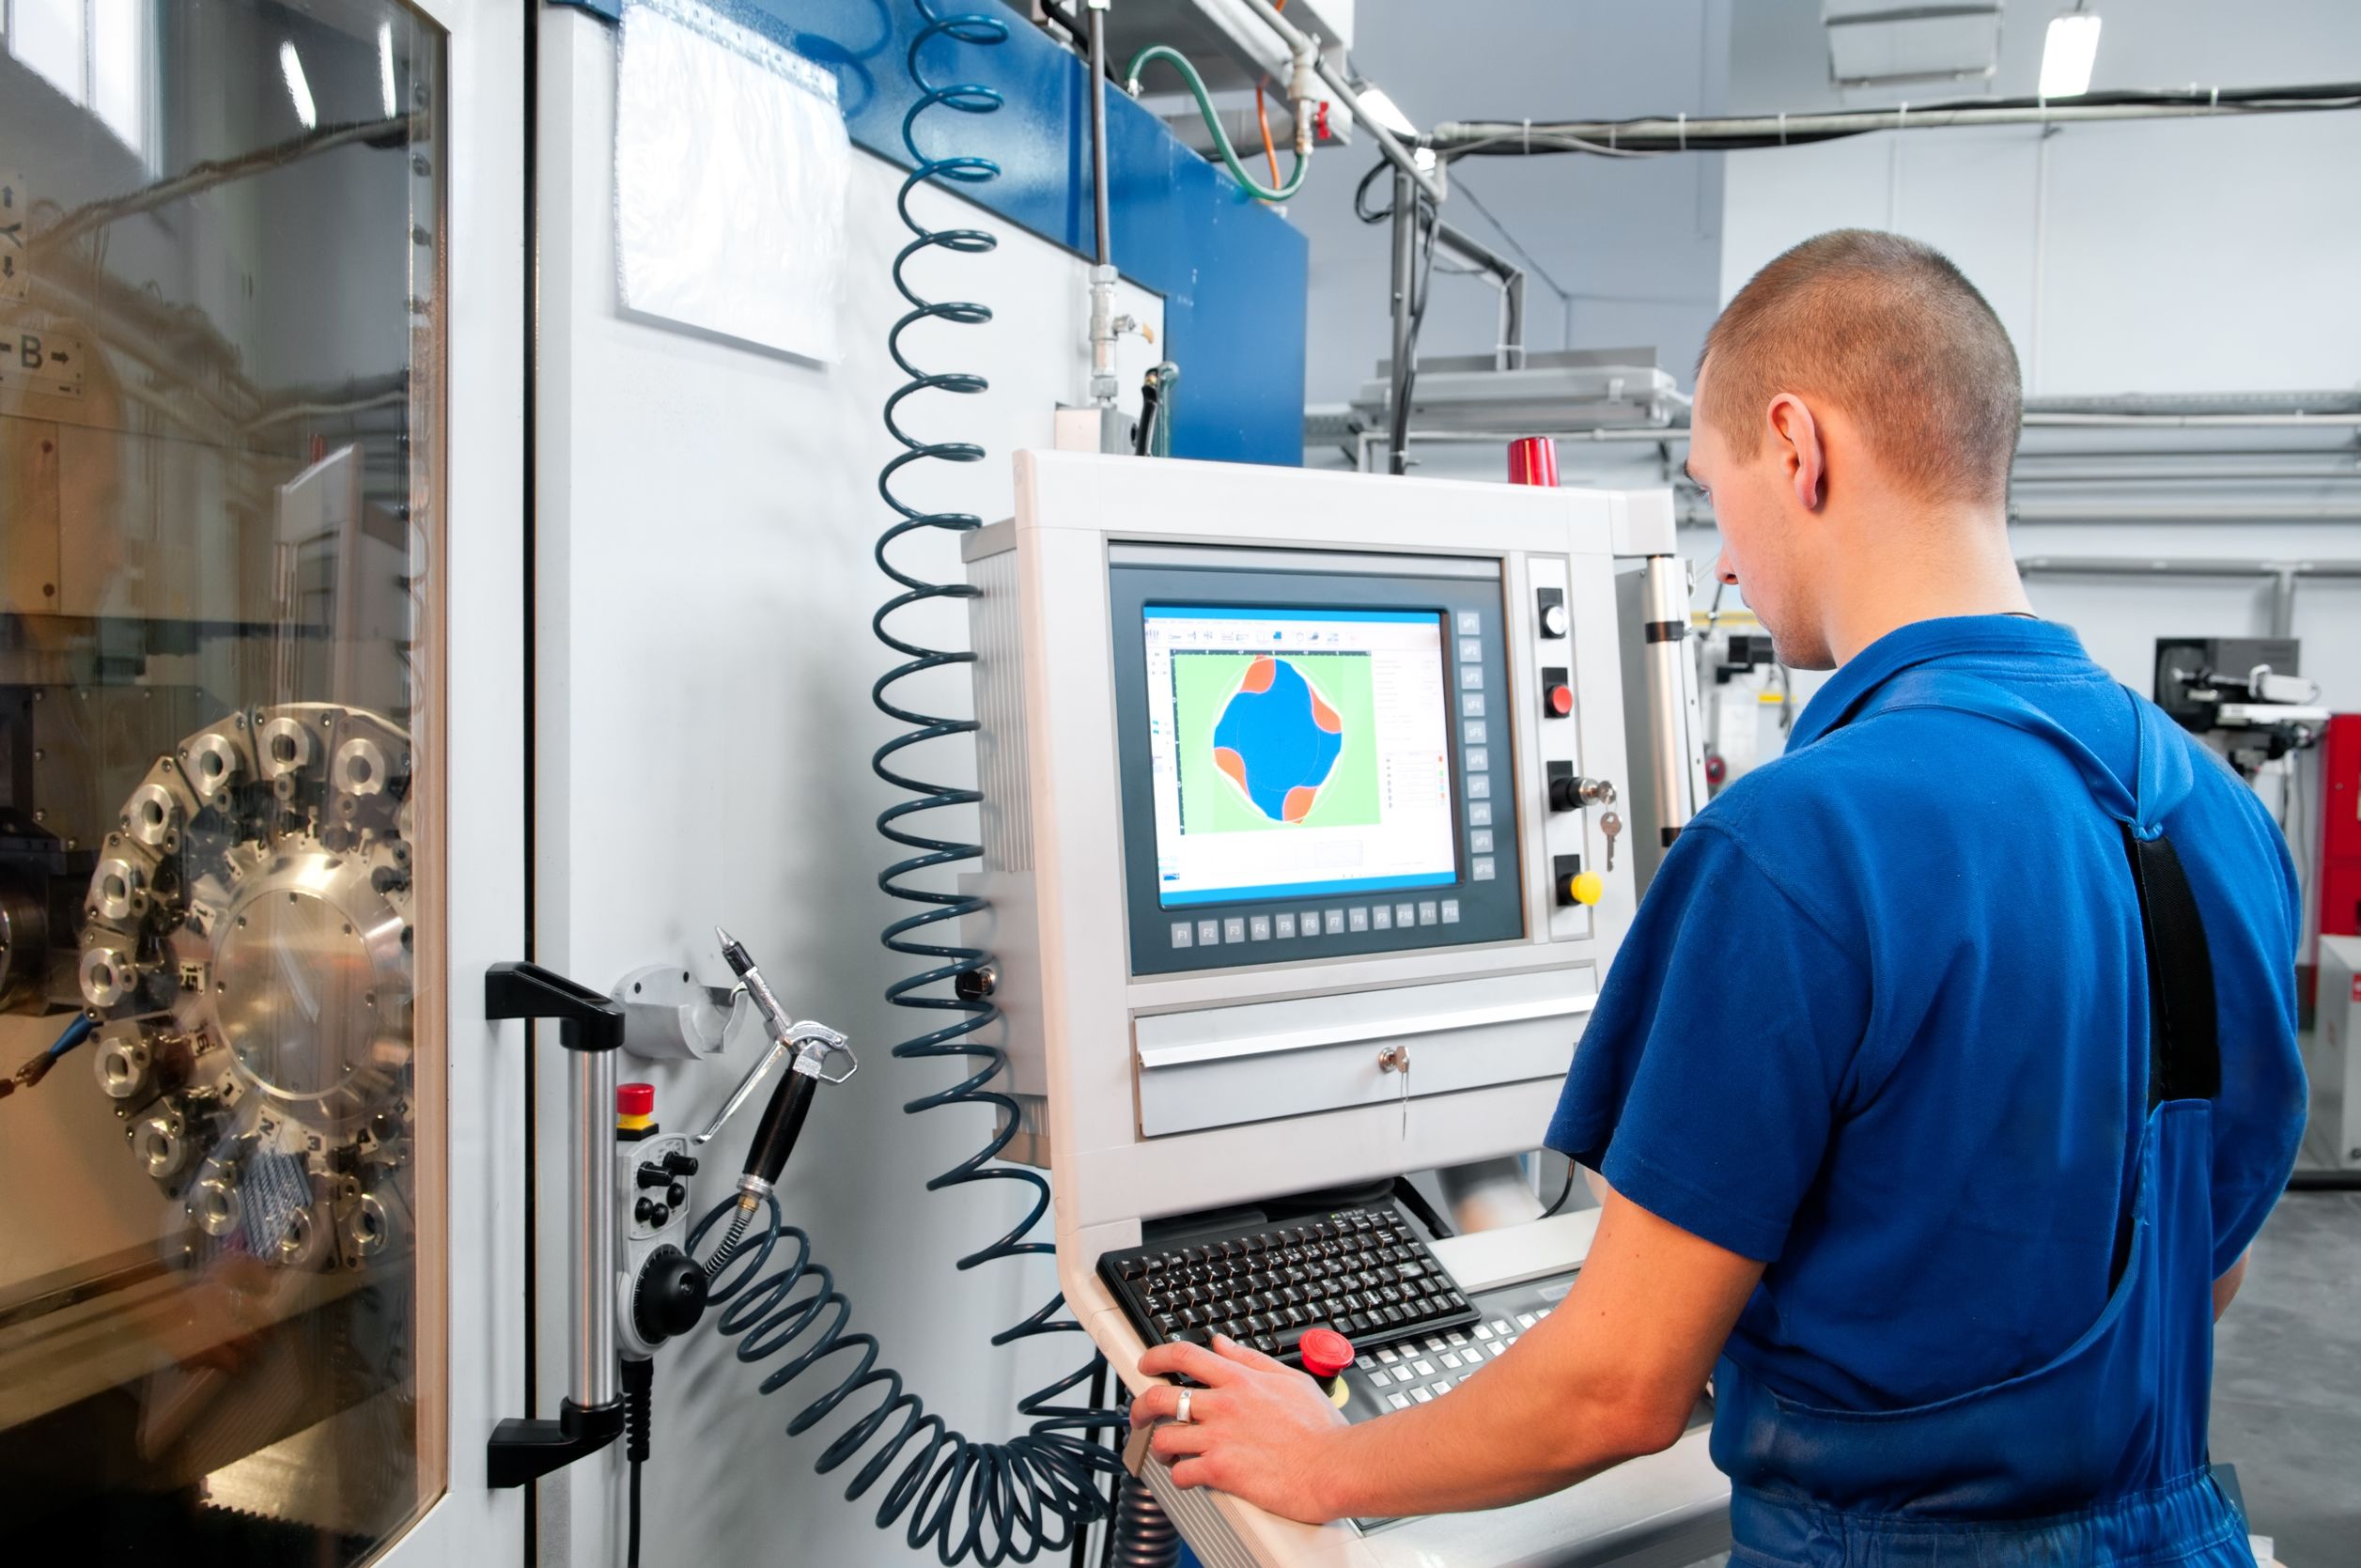 VIDEO – Benefits of a Career in the Manufacturing Industry